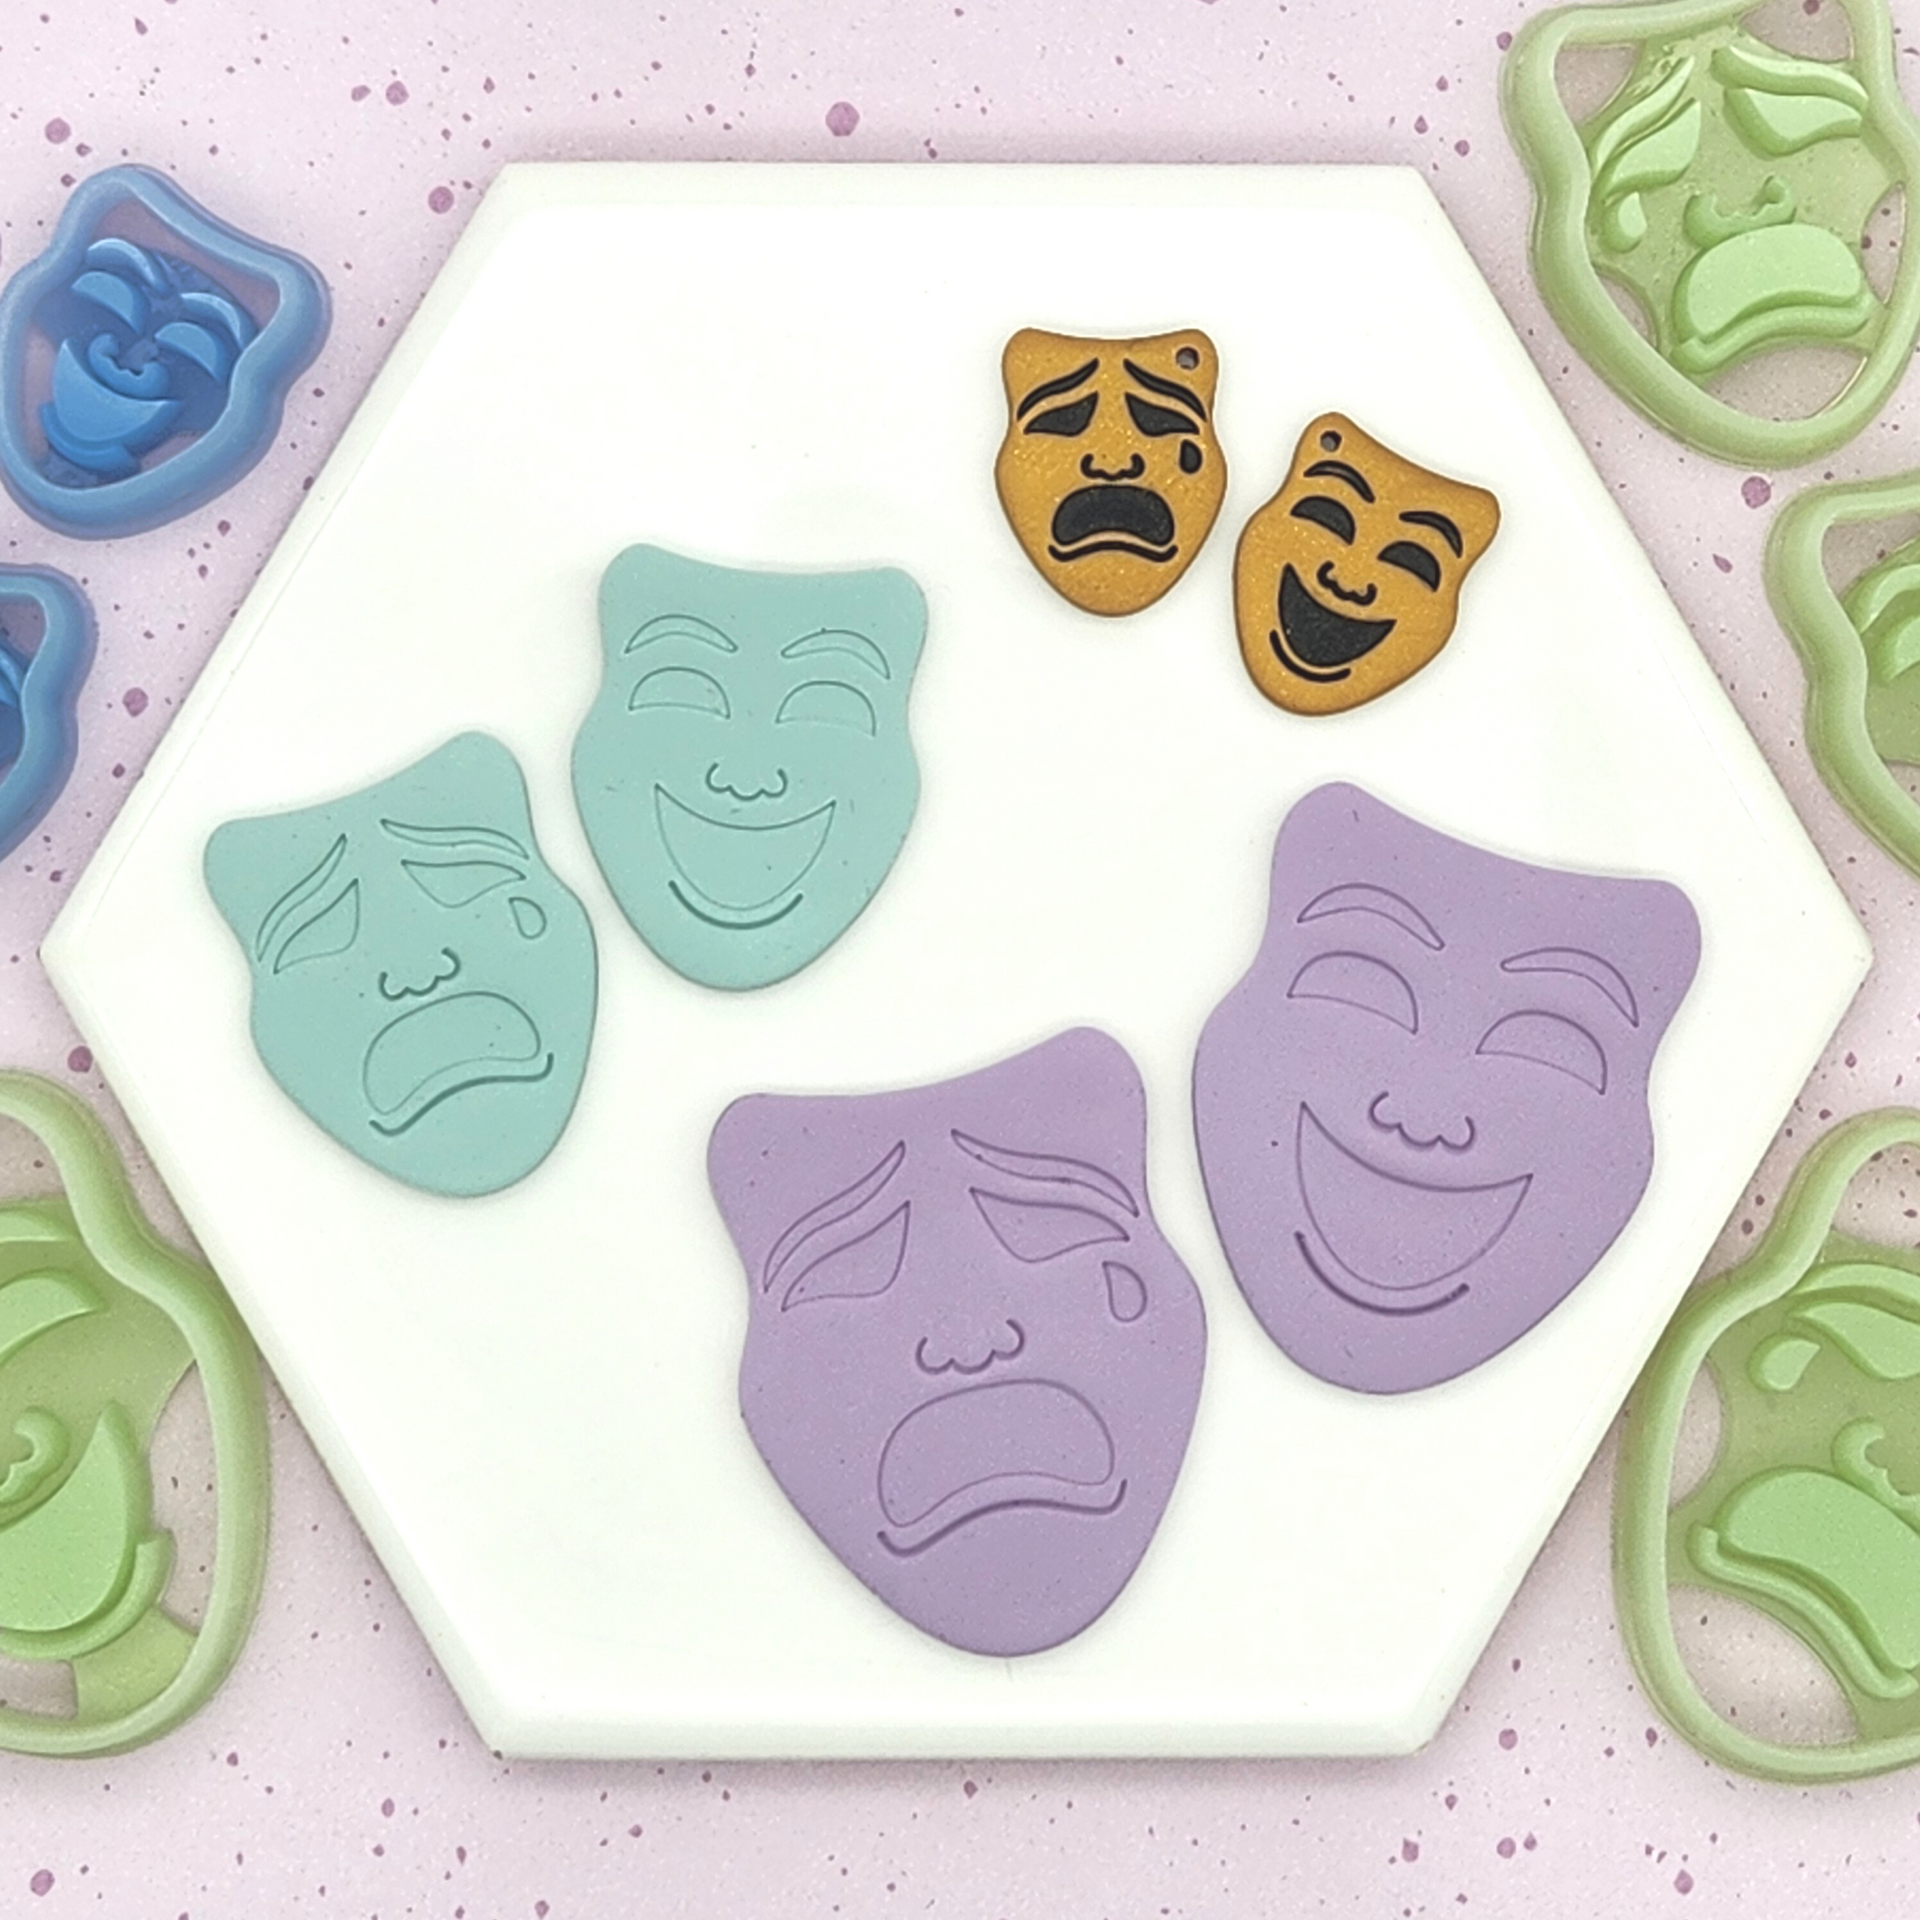 Clay cutters Theatre masks, Polymer clay cutters